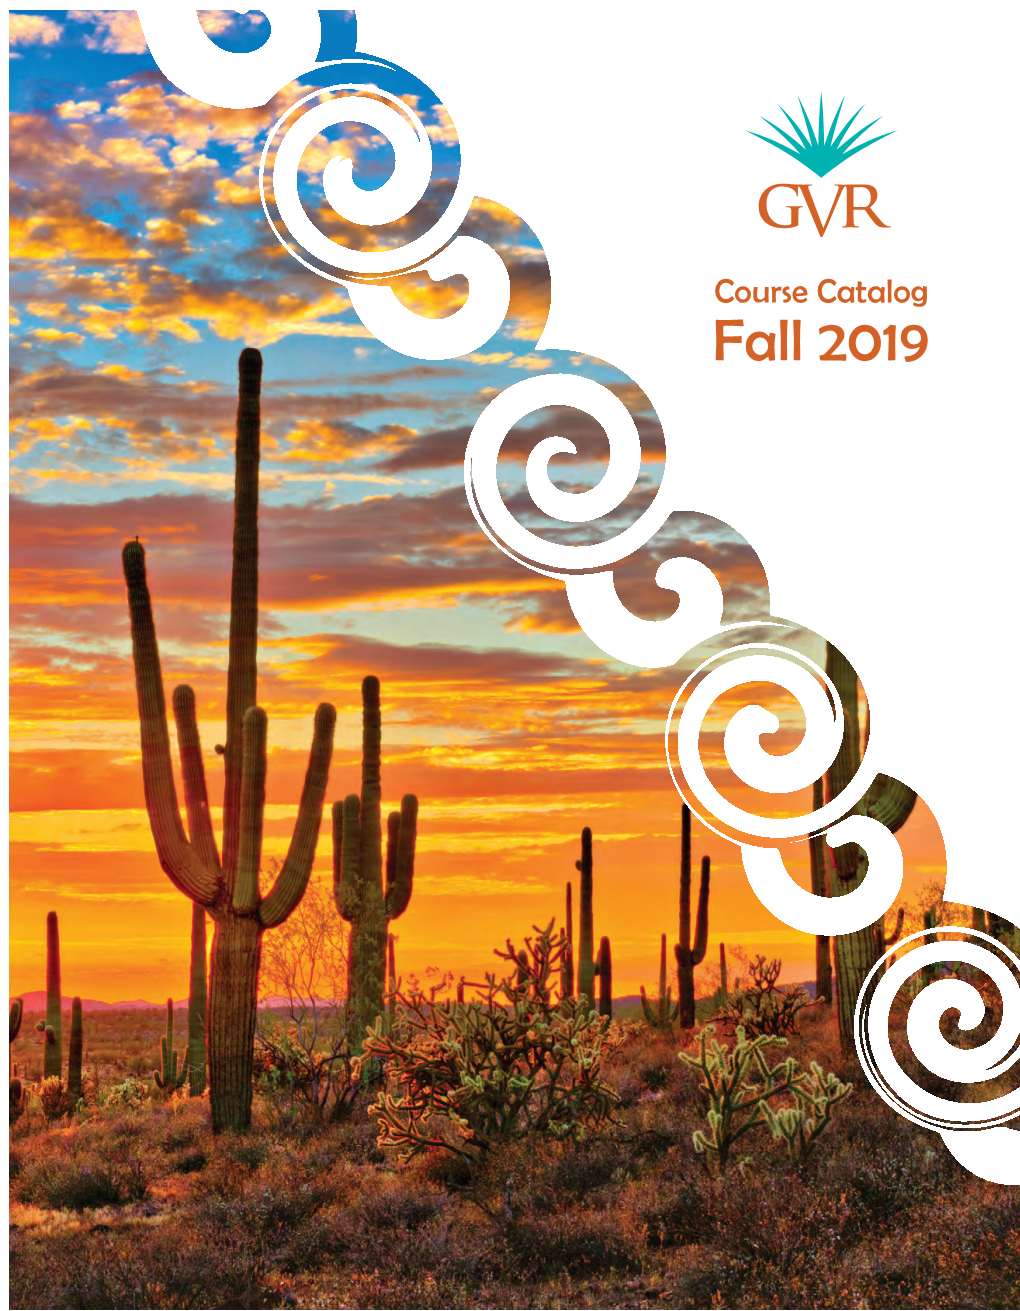 Course Catalog Fall 2019 We Keep You Healthy! Quality Healthcare Close to Home Four Professionals Are on Board, SURGERY Ready to Keep You Healthy & Active